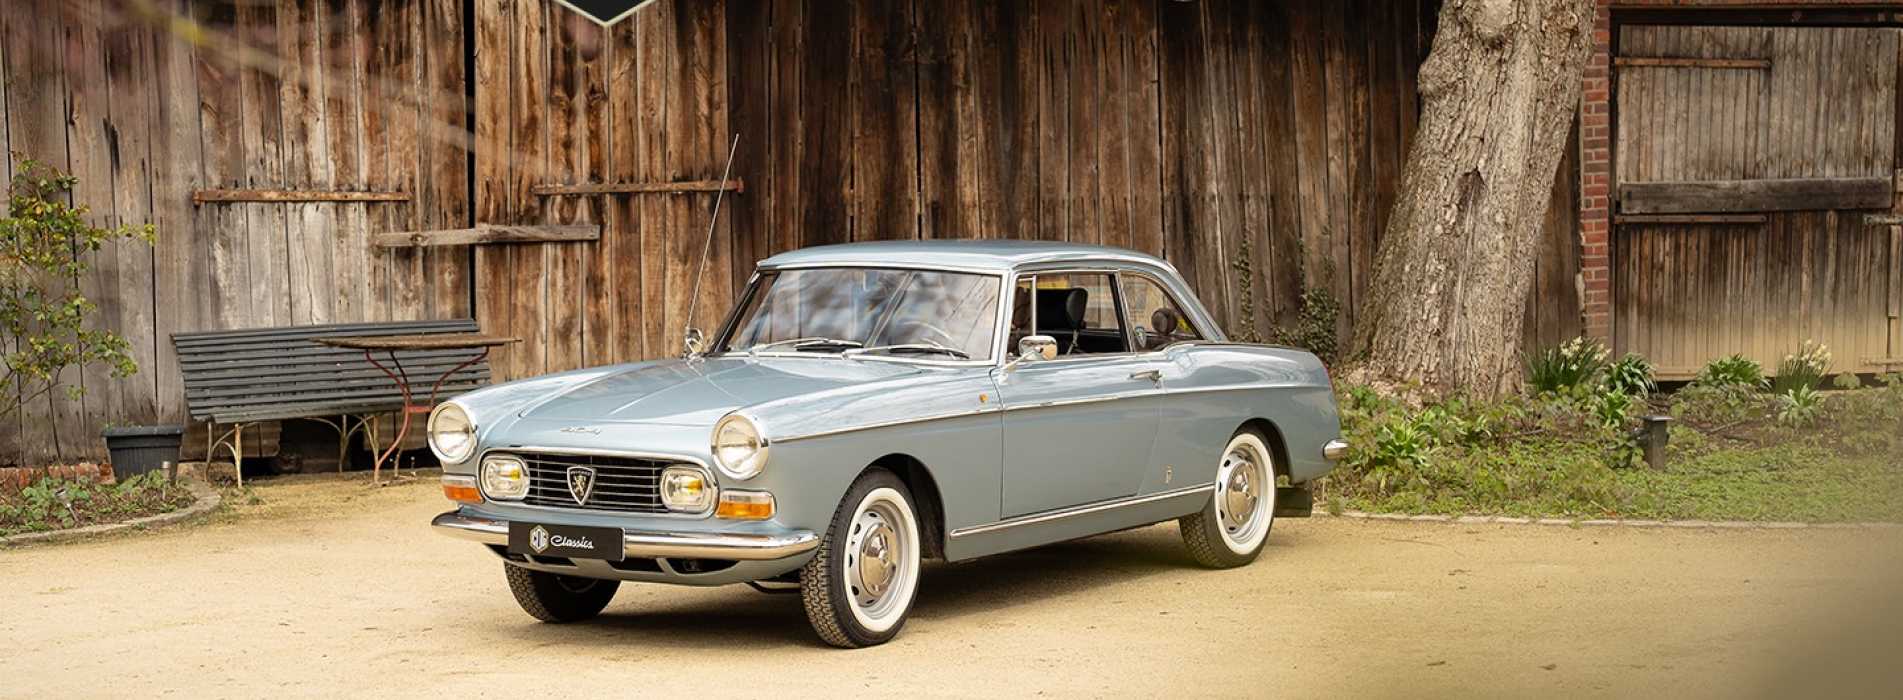 Peugeot 404 Coupe 14